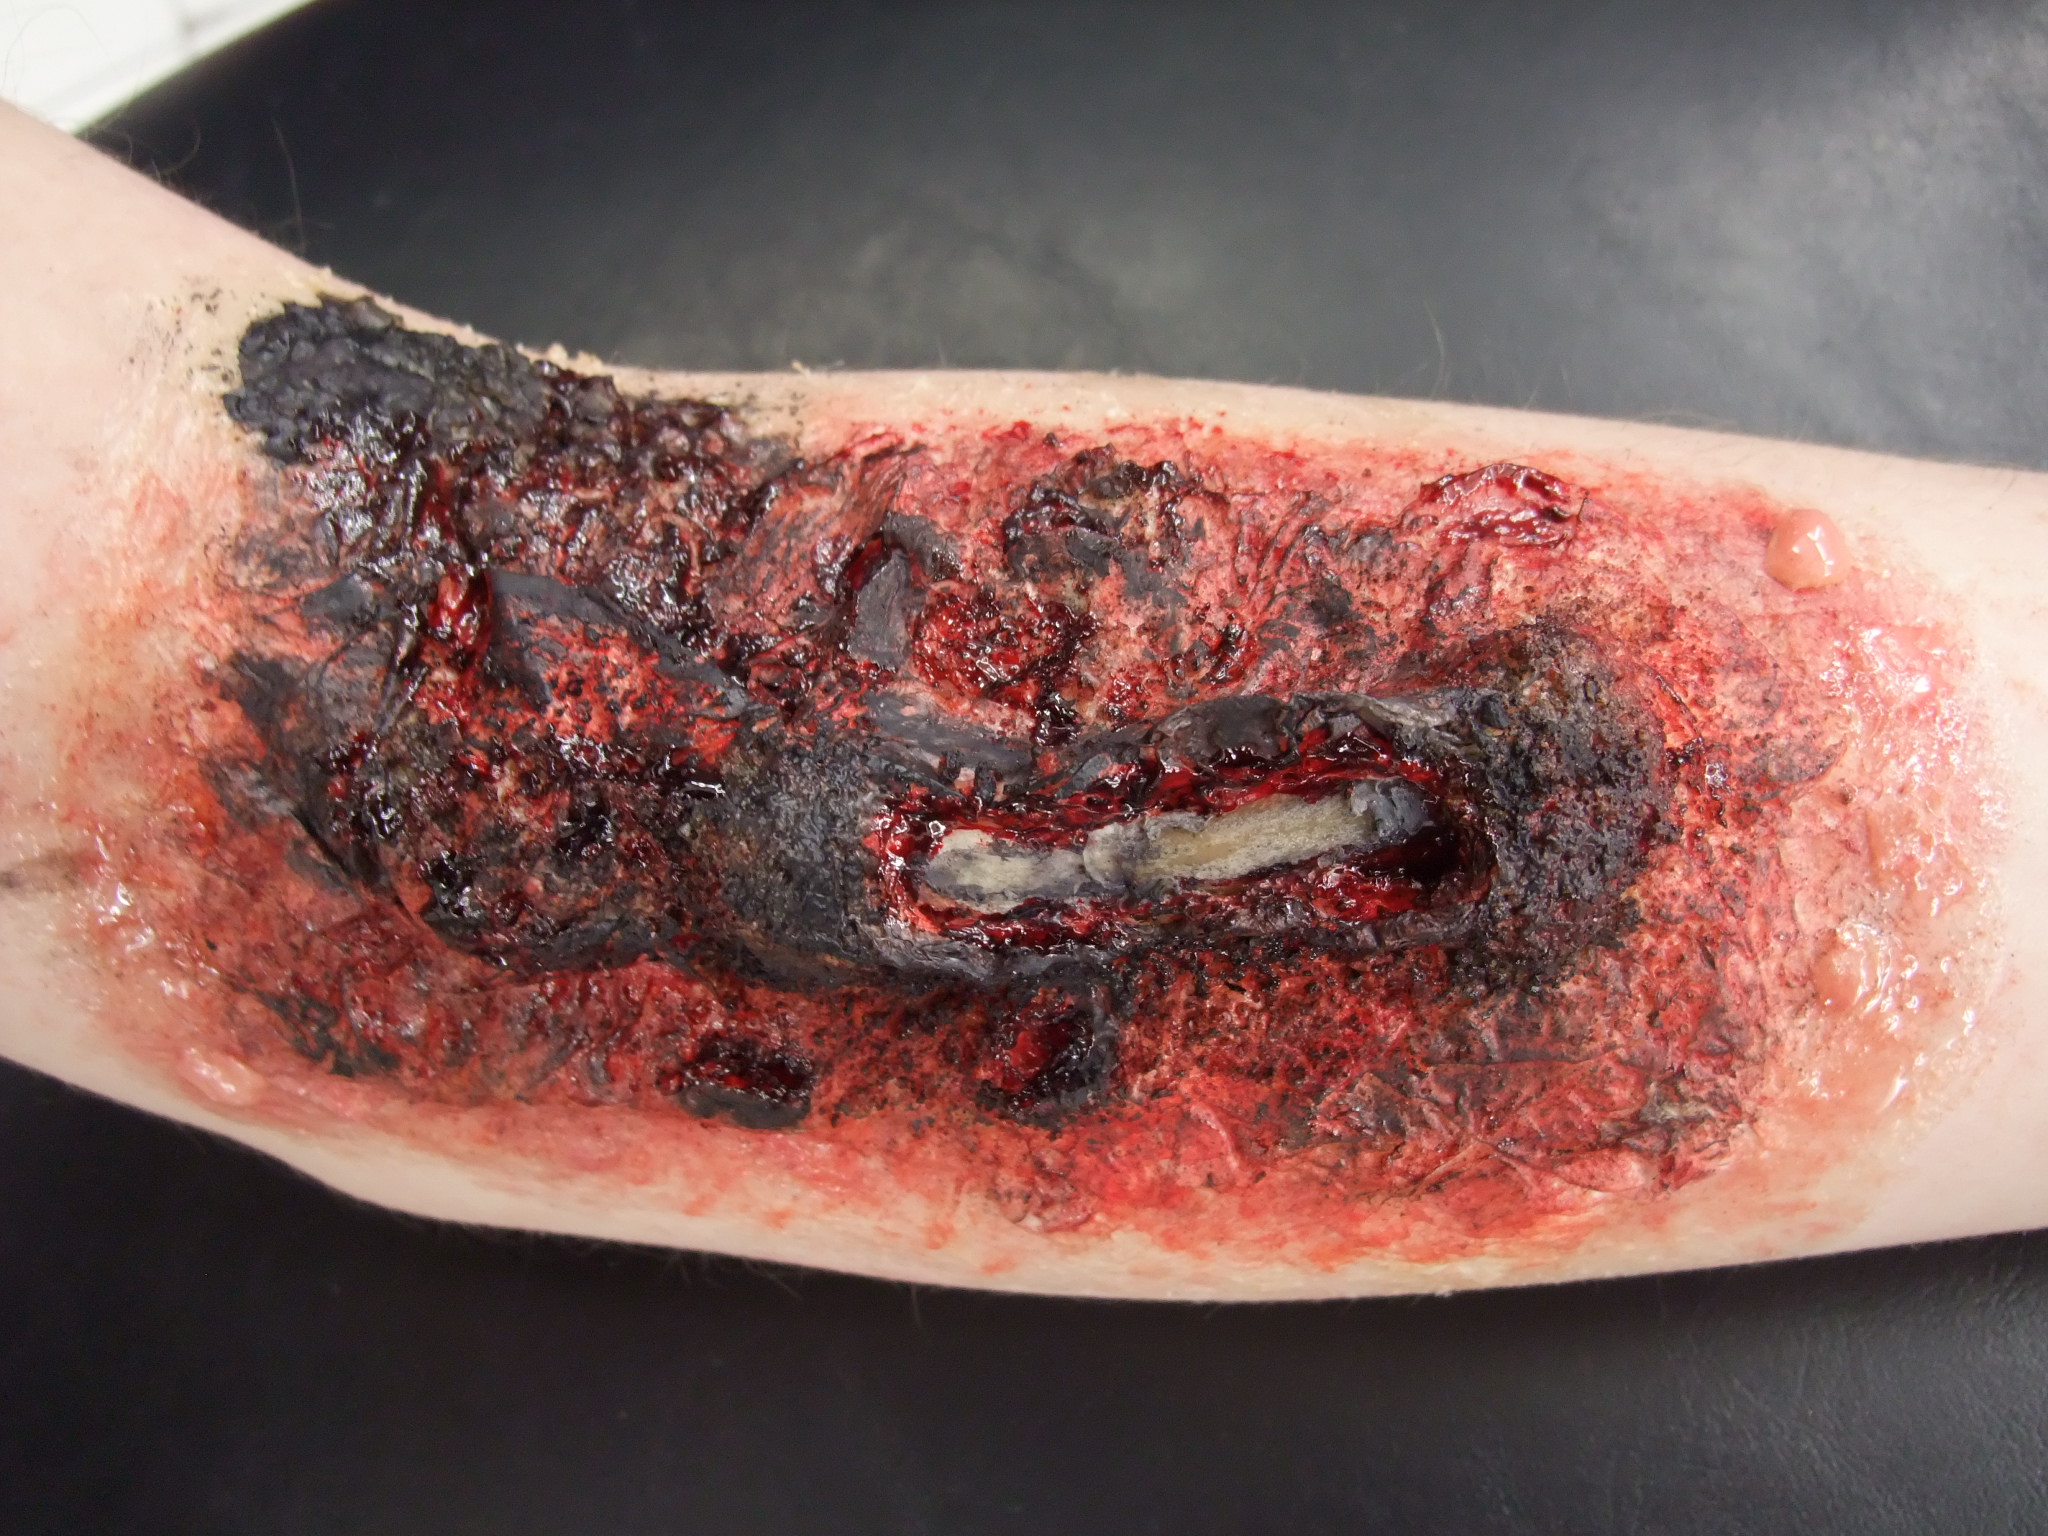 3rd Degree Burn Treatment Pictures, Images & Photos ...